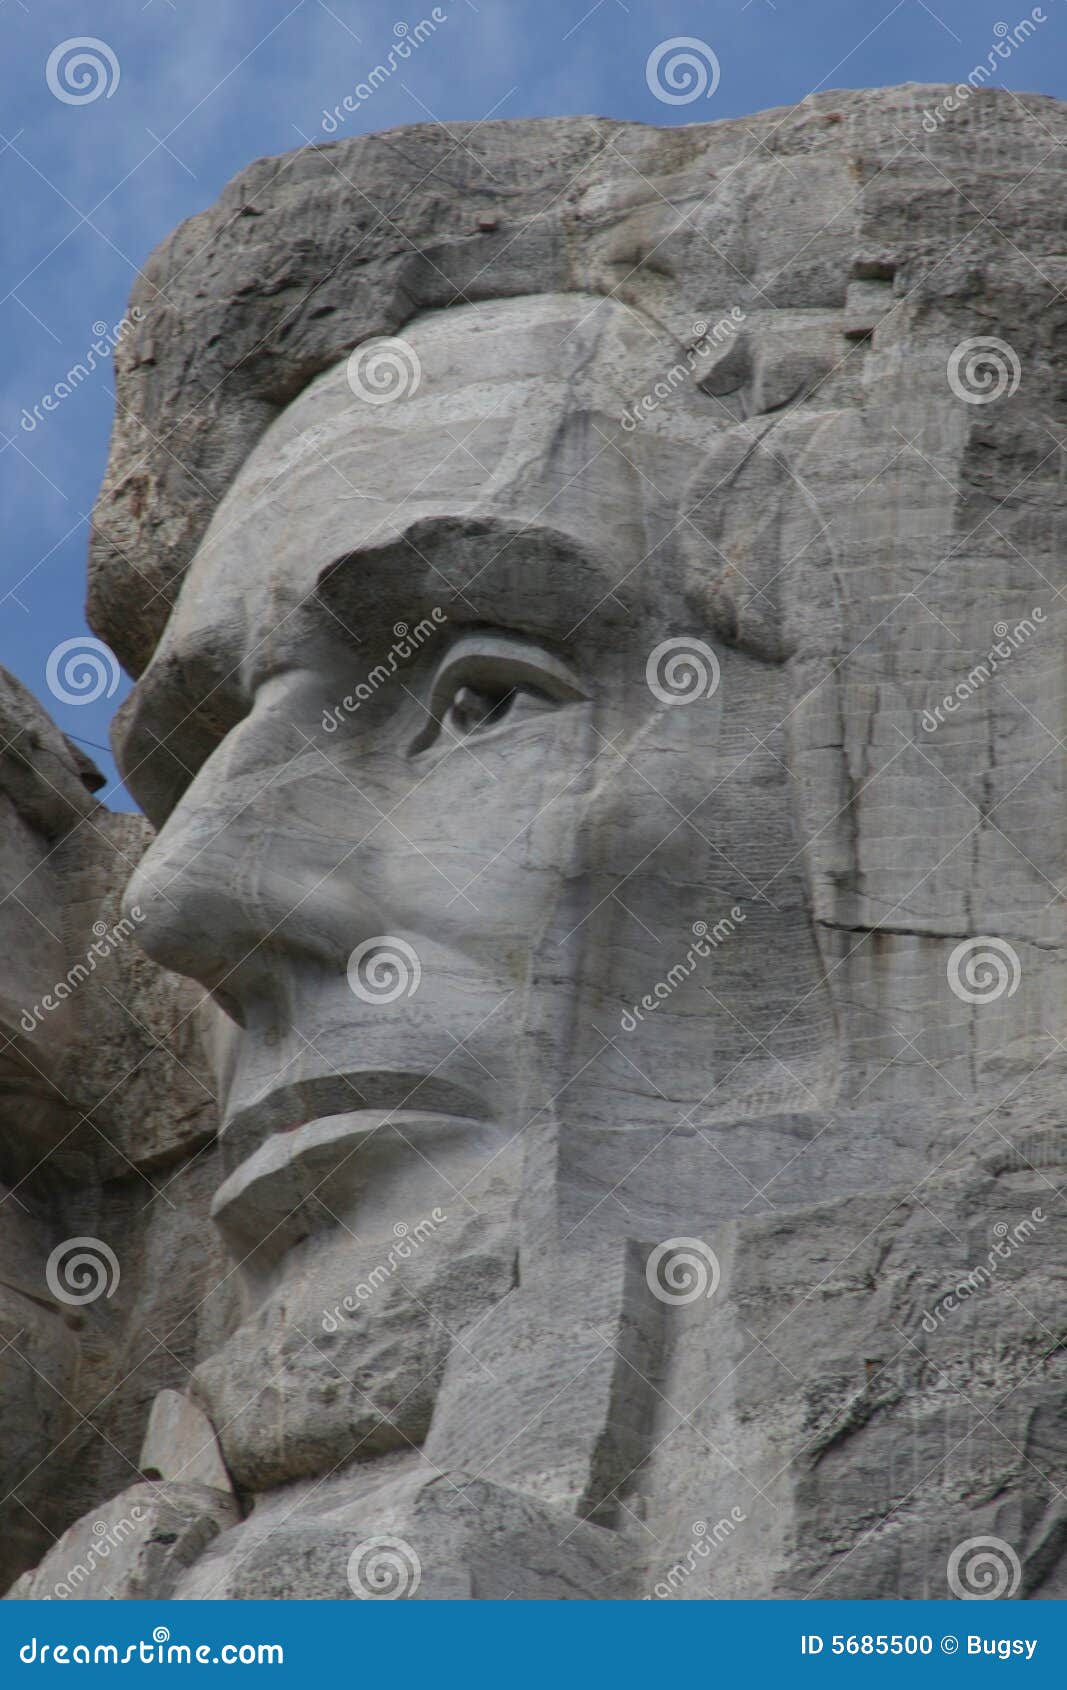 abraham lincoln on mount rushmore